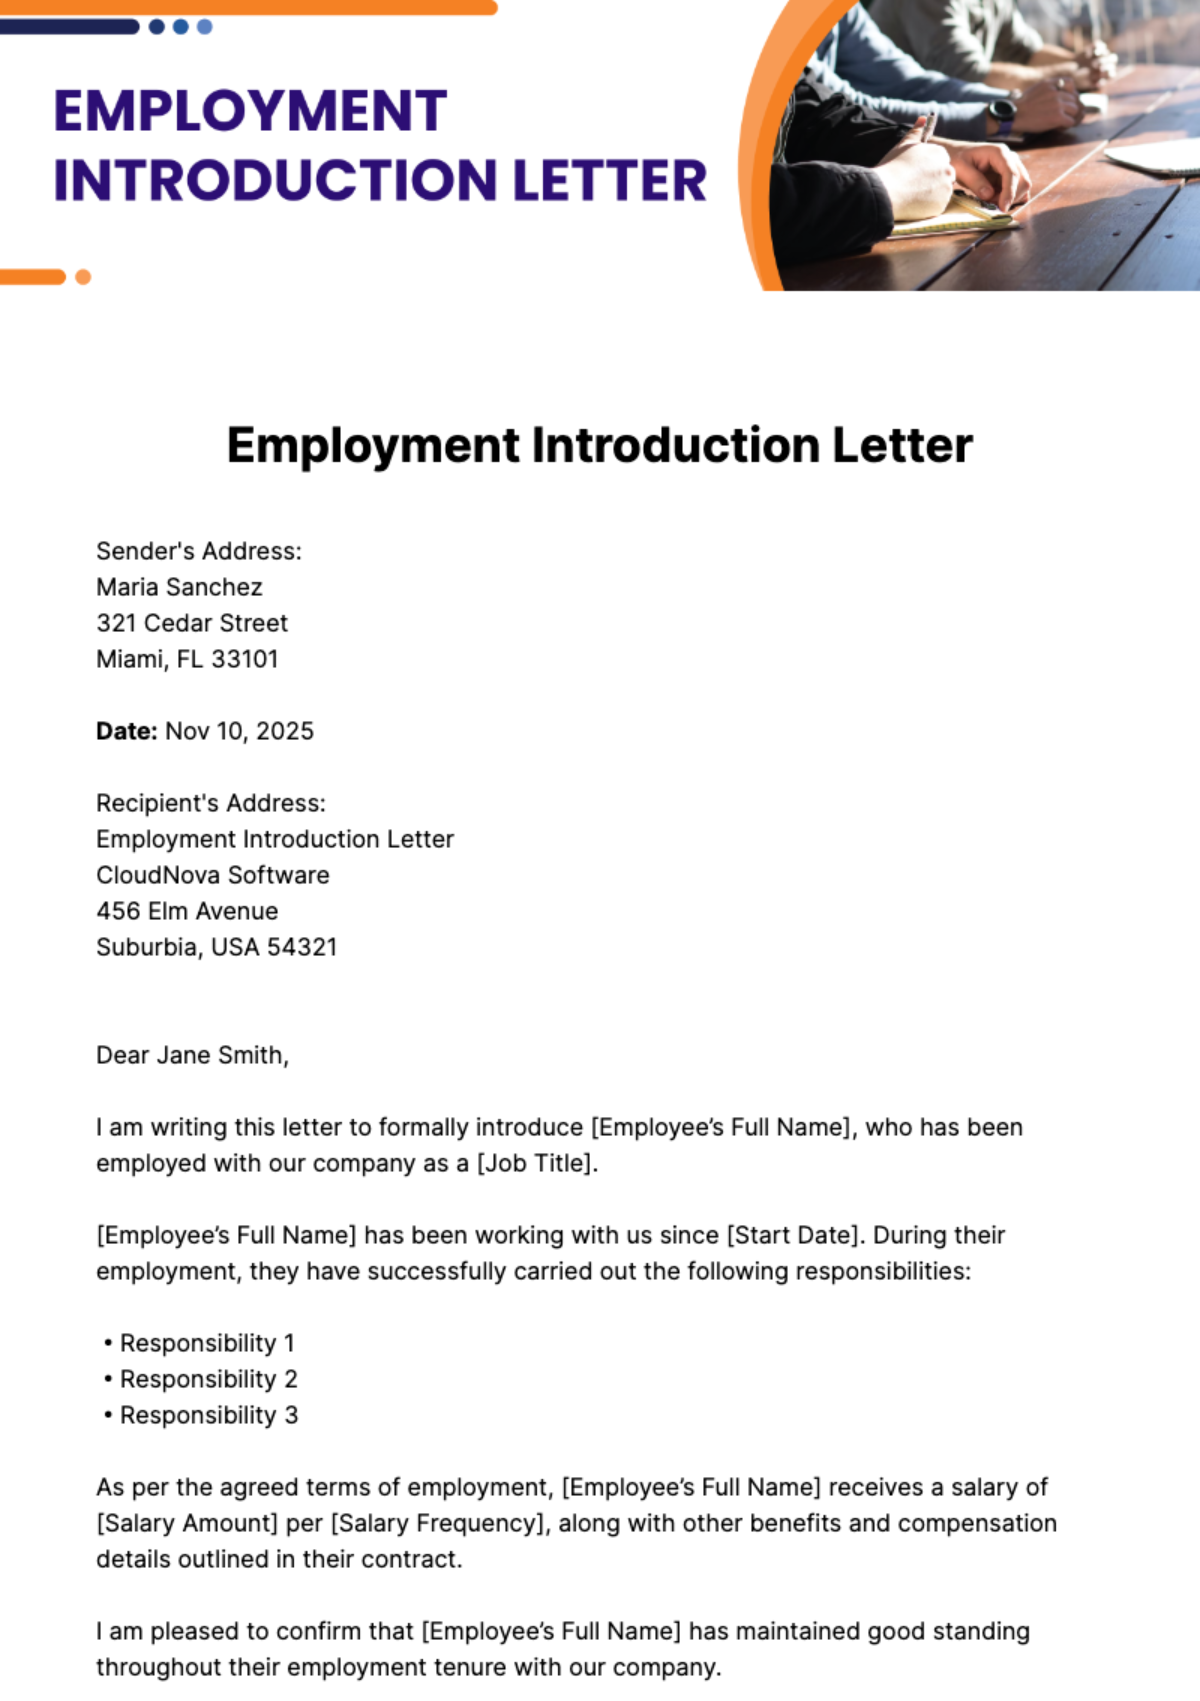 Employment Introduction Letter Template